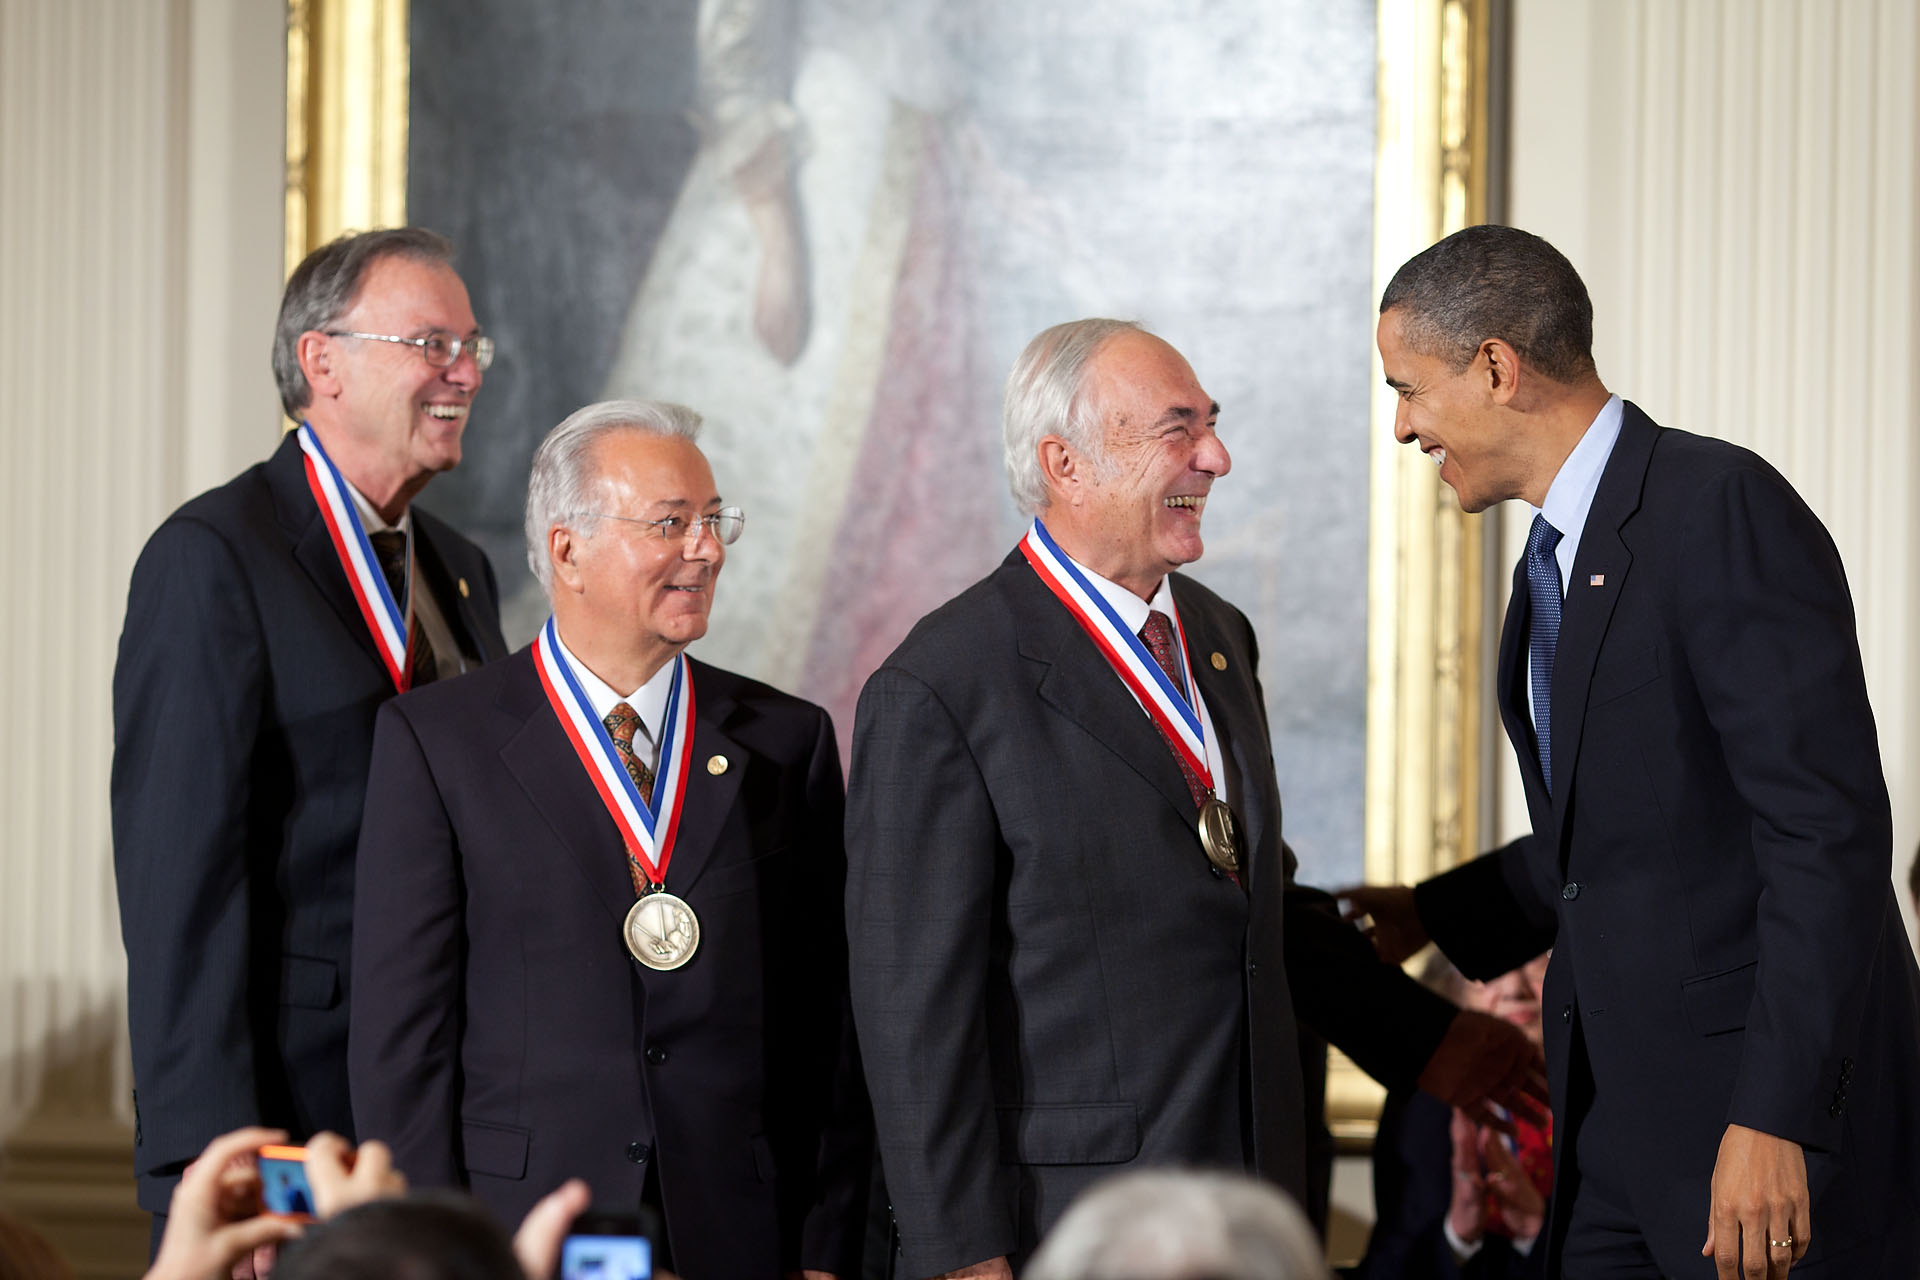 President Obama Awards National Medals of Science, Technology and